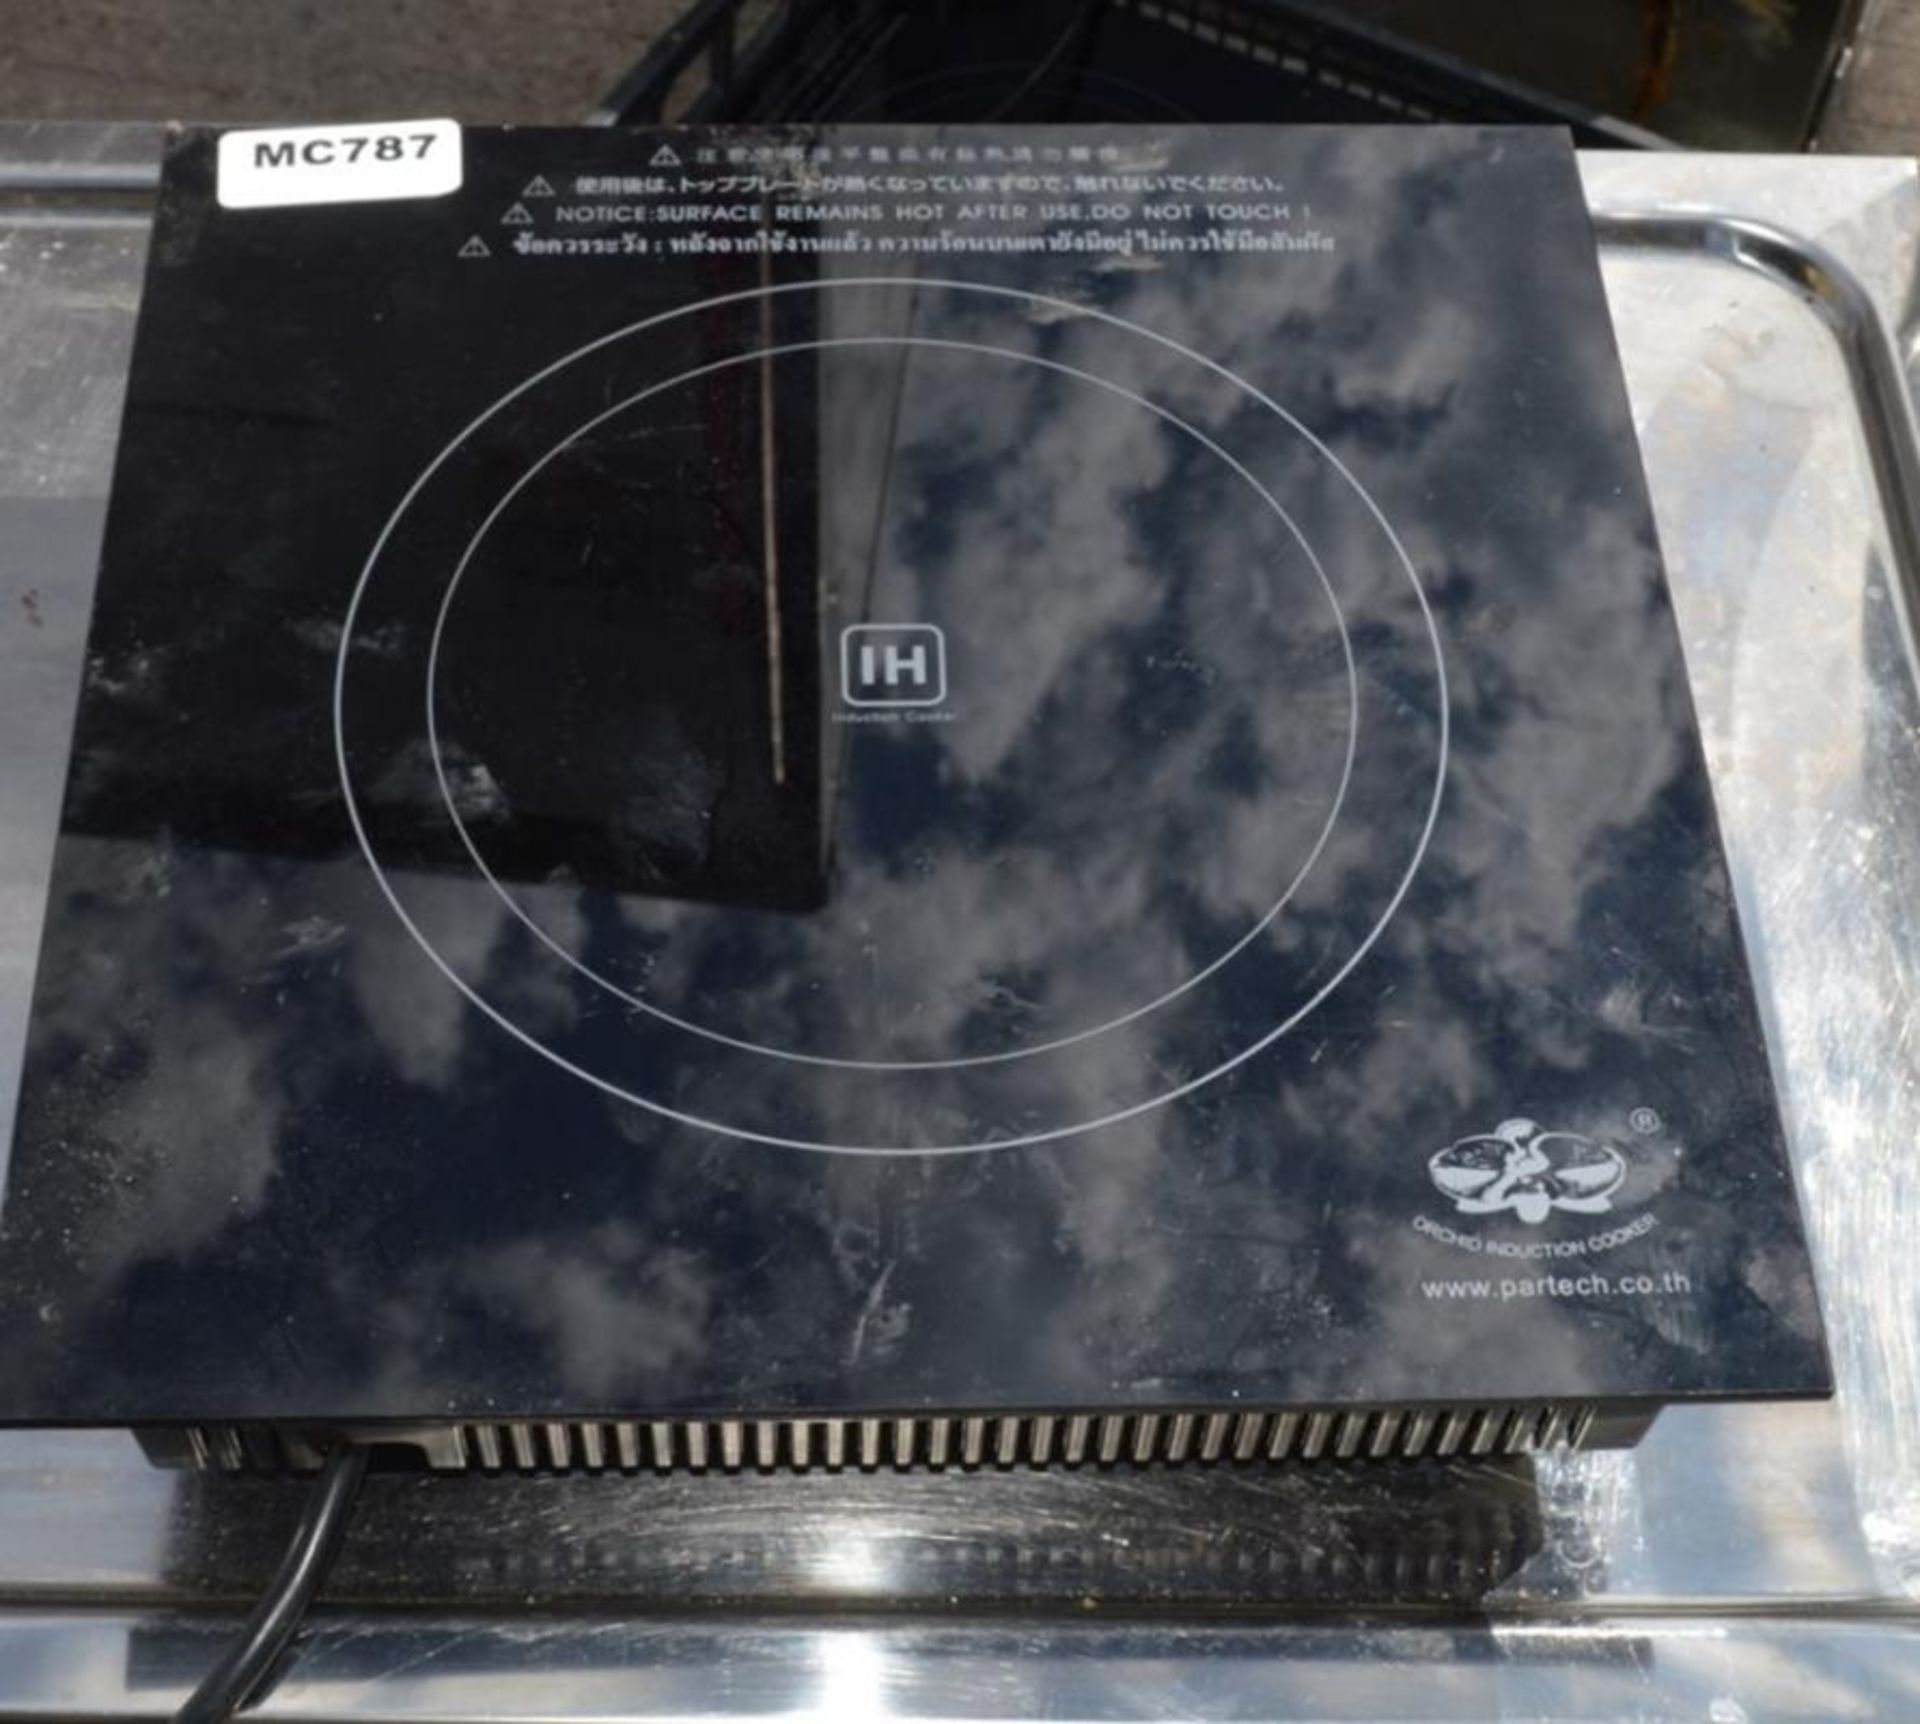 1 x Orchid IH-G1113A Induction Cooker - Pre-owned, Taken From An Asian Fusion Restaurant - Ref: MC78